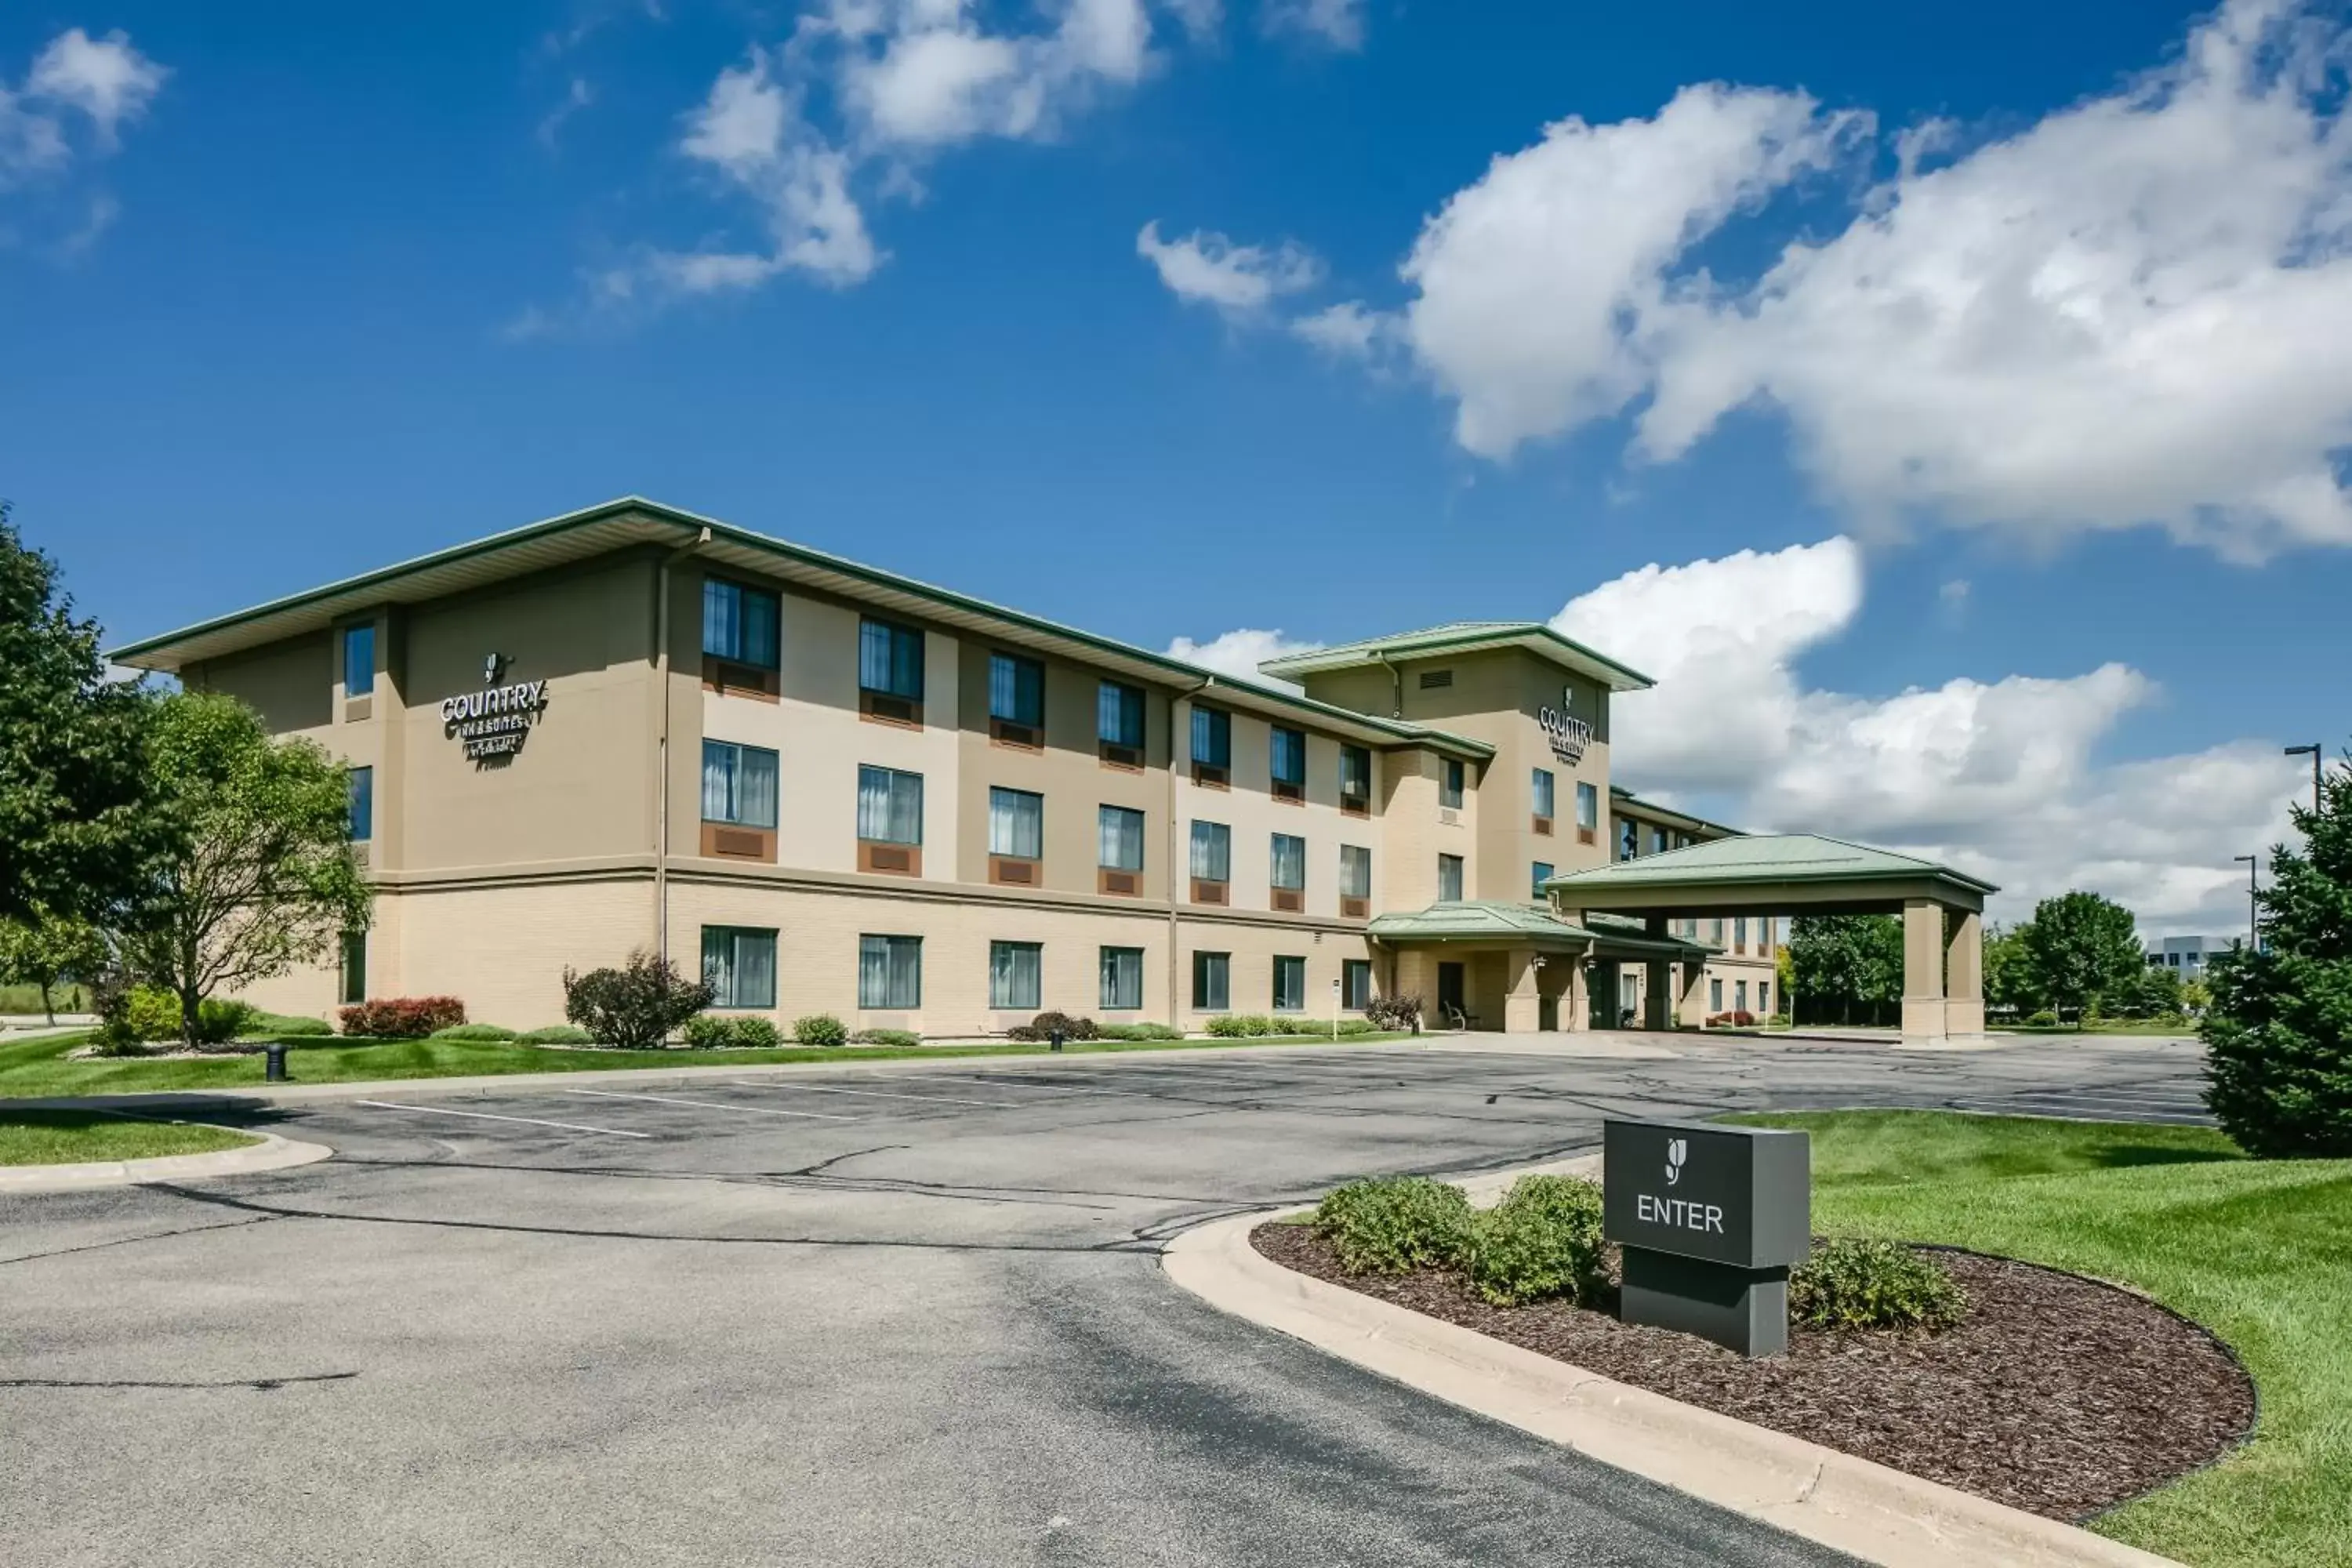 Facade/entrance, Property Building in Country Inn & Suites by Radisson, Madison West, WI